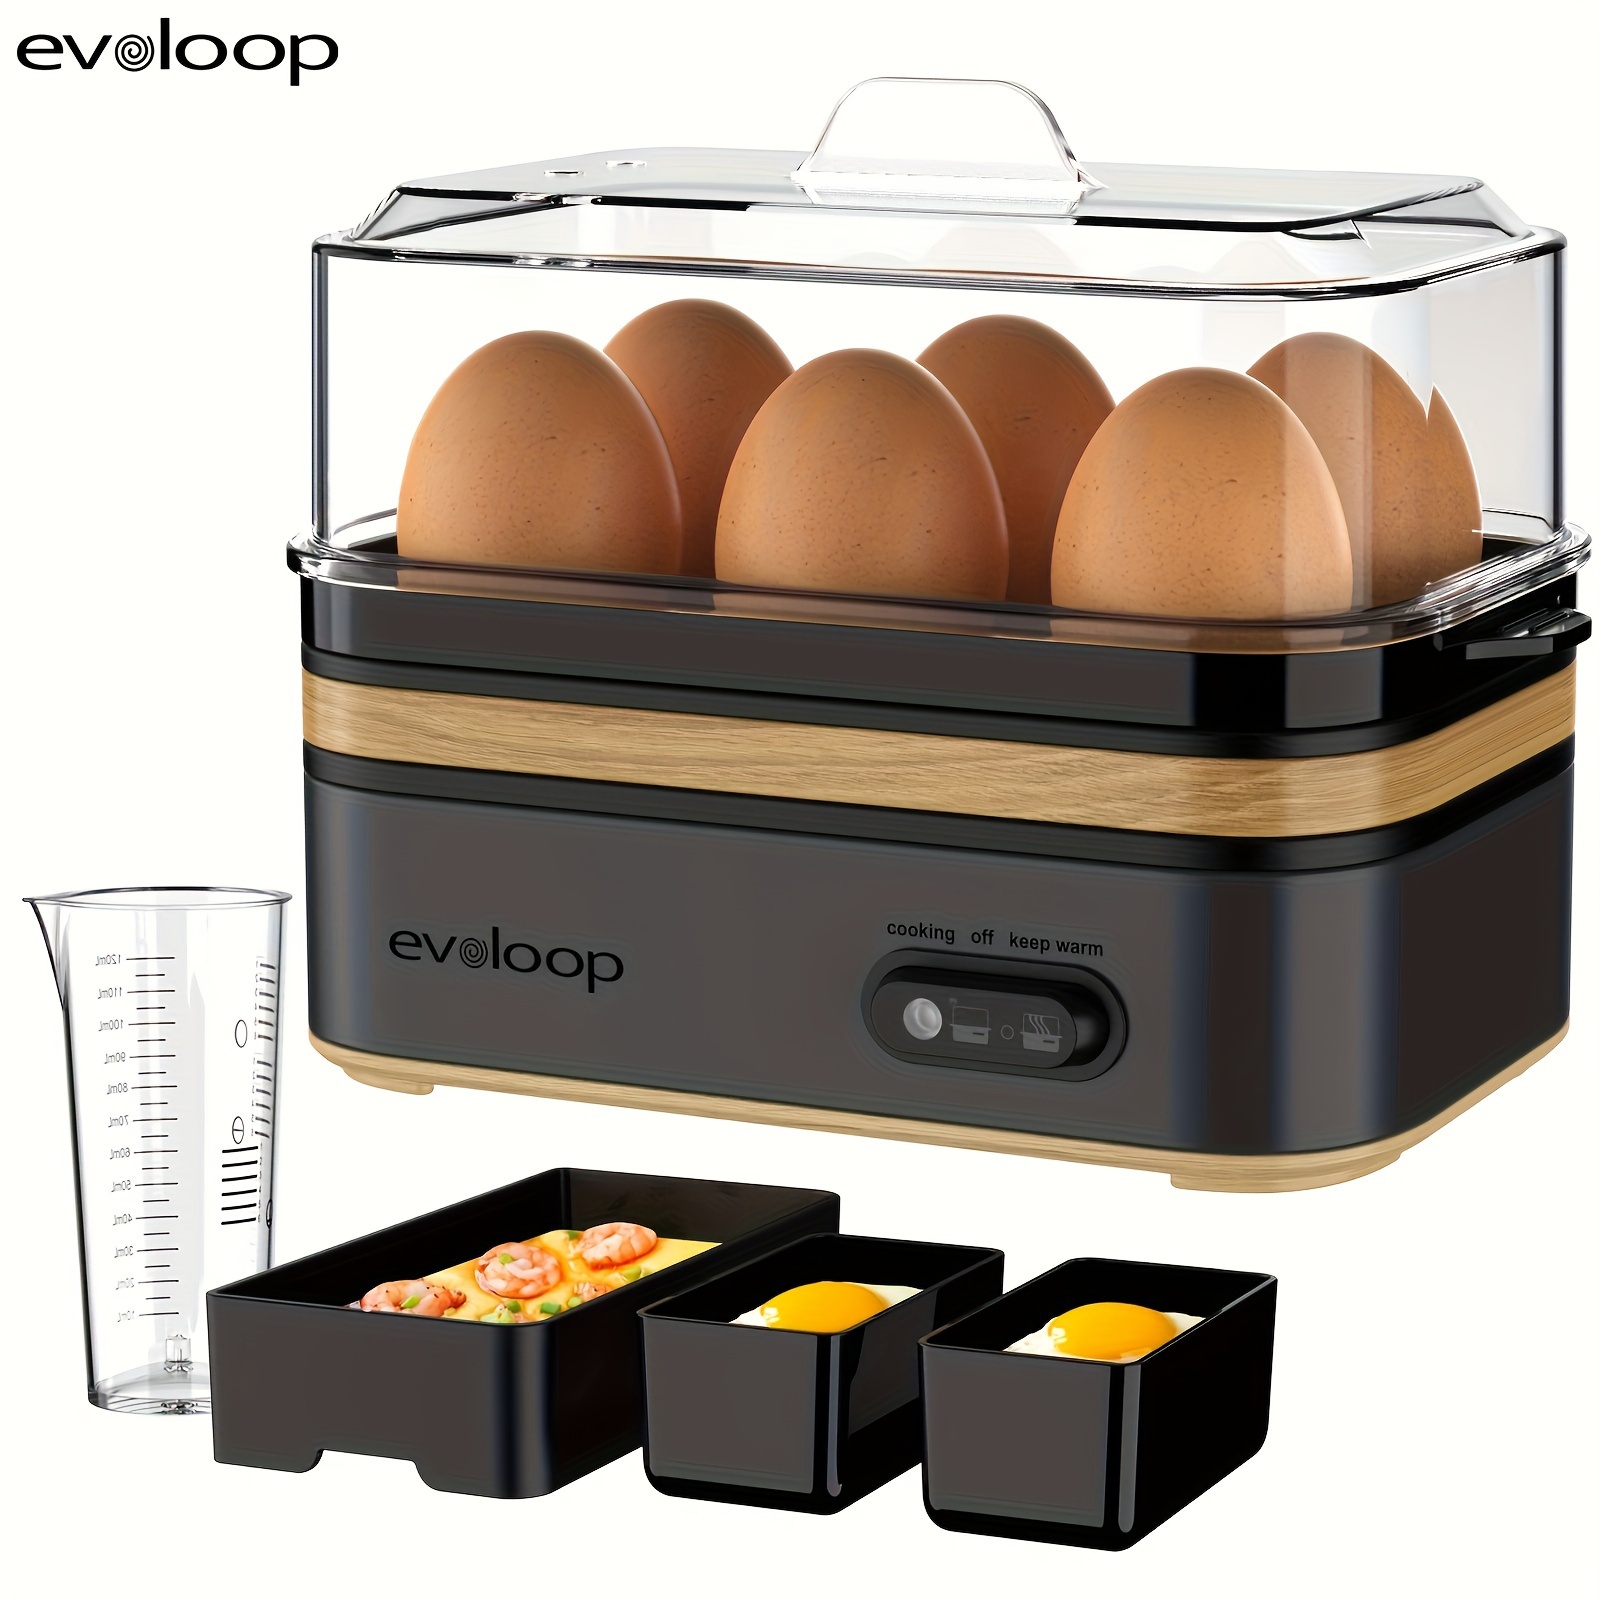 

Evoloop Rapid Egg Cooker 6 Egg Capacity Bpa Free Electric Egg Cooker For Hard Boiled Eggs, Poached Eggs, Scrambled Eggs, Or Omelets With Auto Shut Off